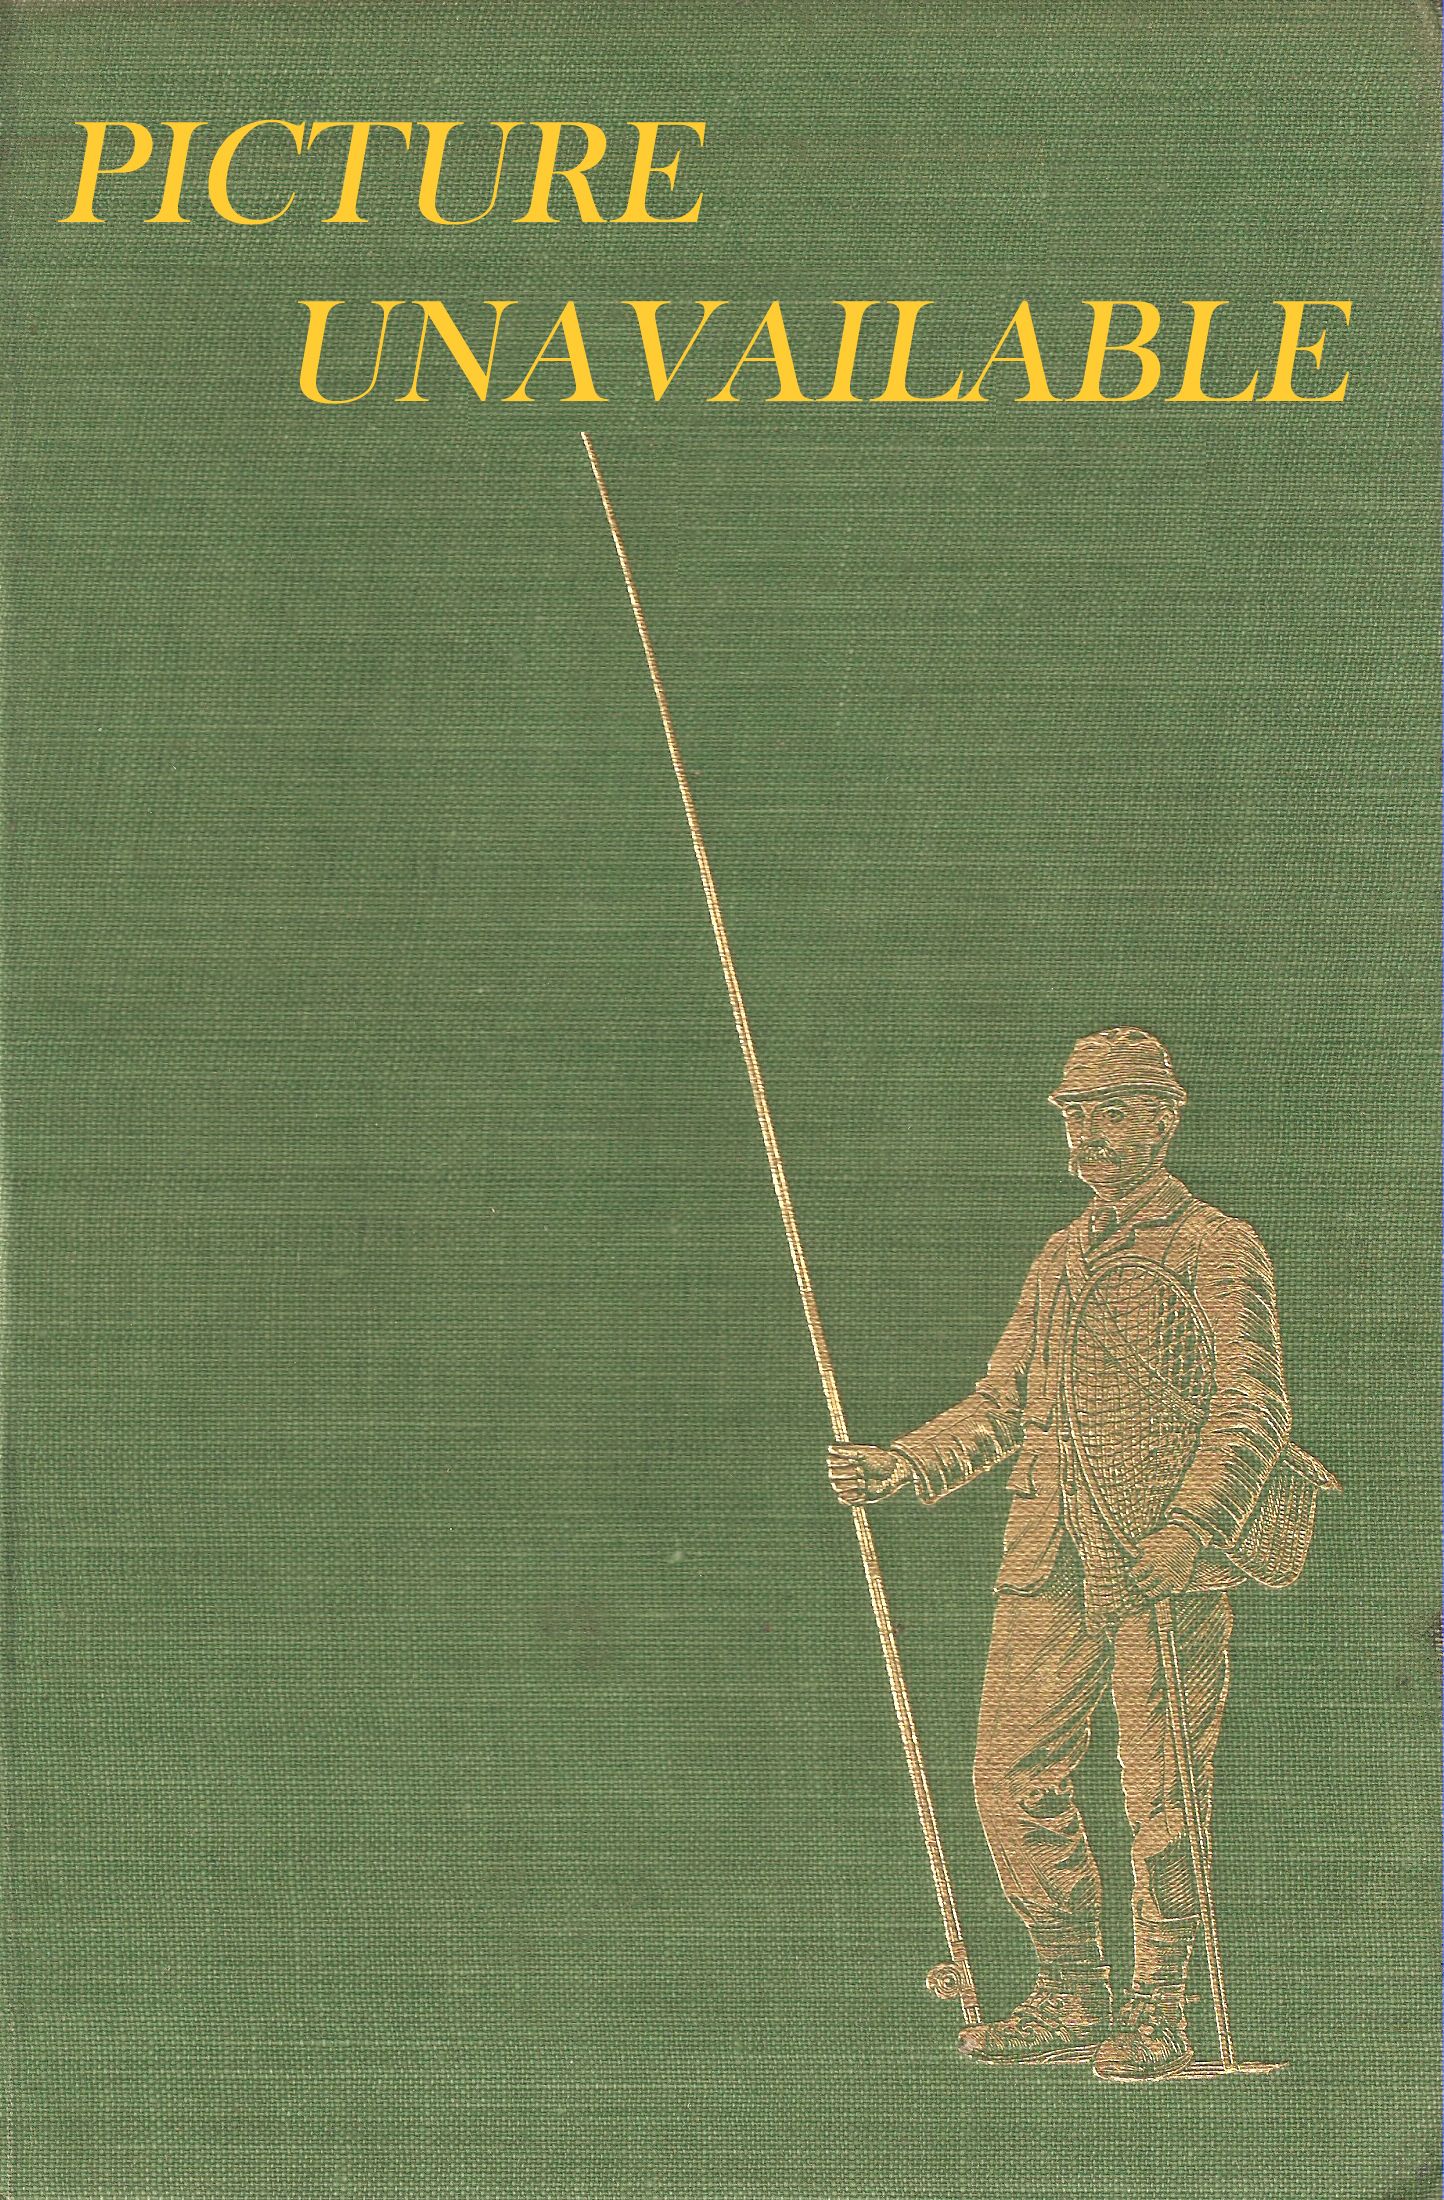 SMALL-STREAM FISHING. By David Carl Forbes. With 33 drawings and diagrams  by the author and 16 photographs.